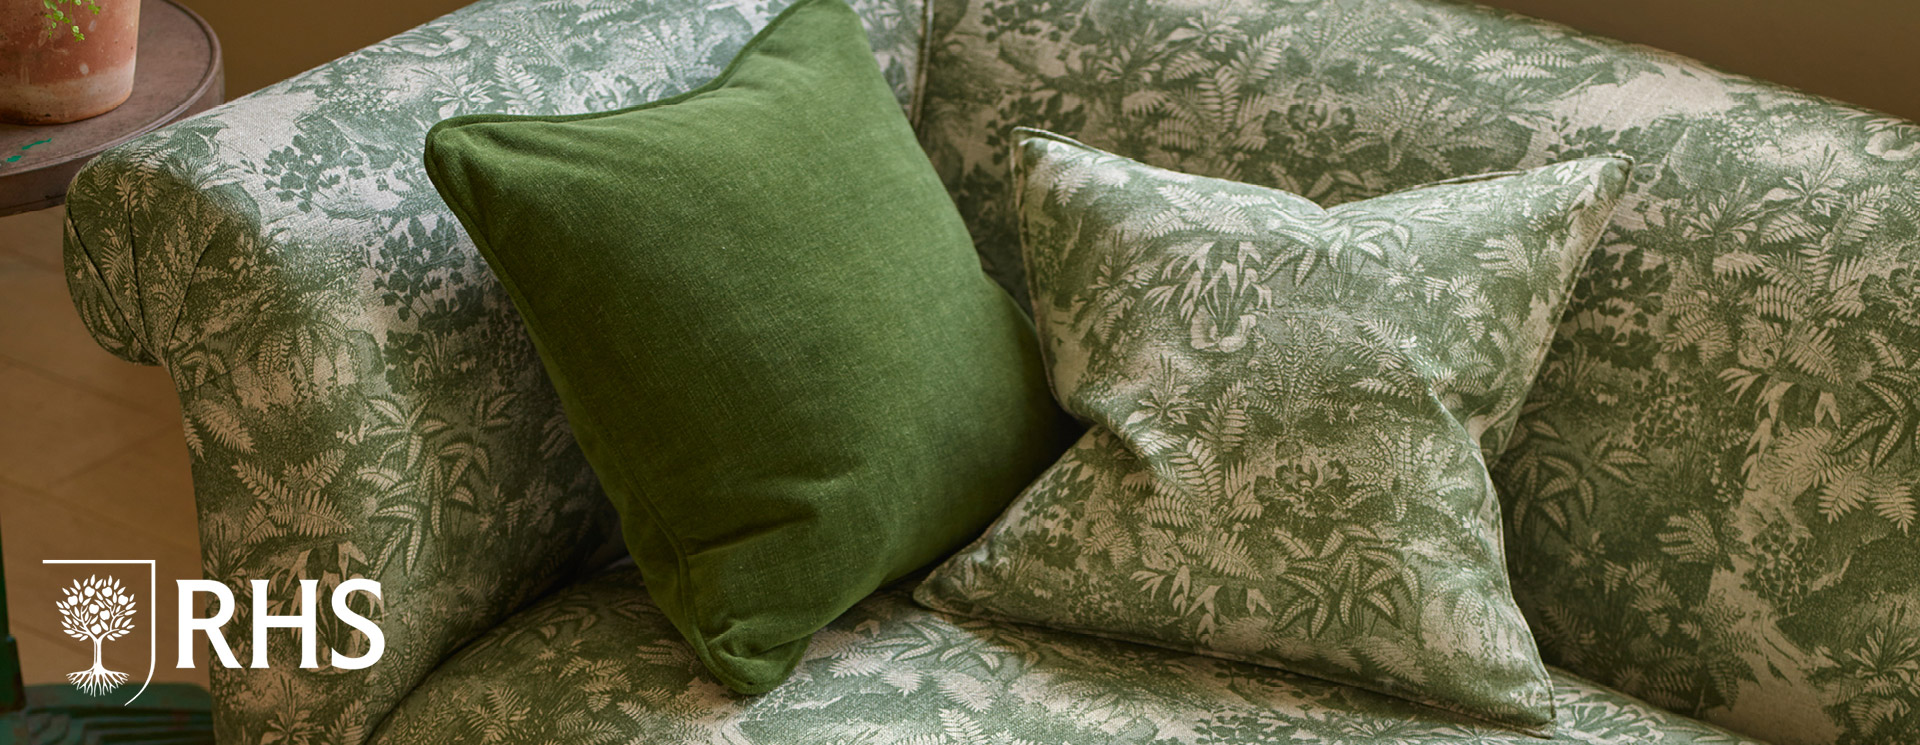 RHS Botanicals fabric collection